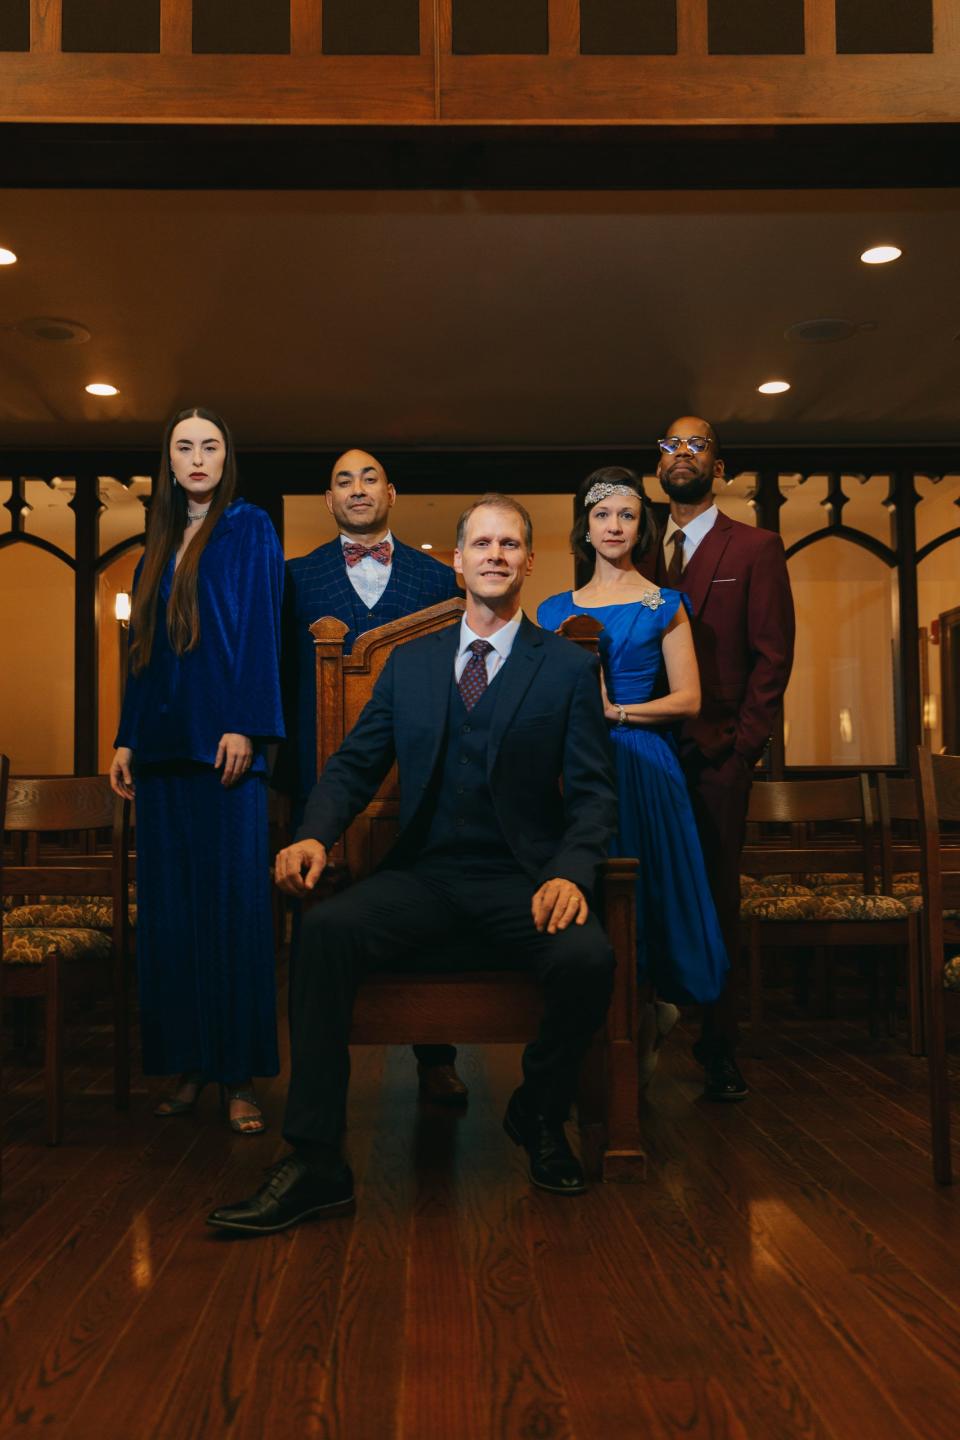 'The Christians' kicks off on Sept. 15 and will be performed at Asbury Memorial Church through Sept. 25.